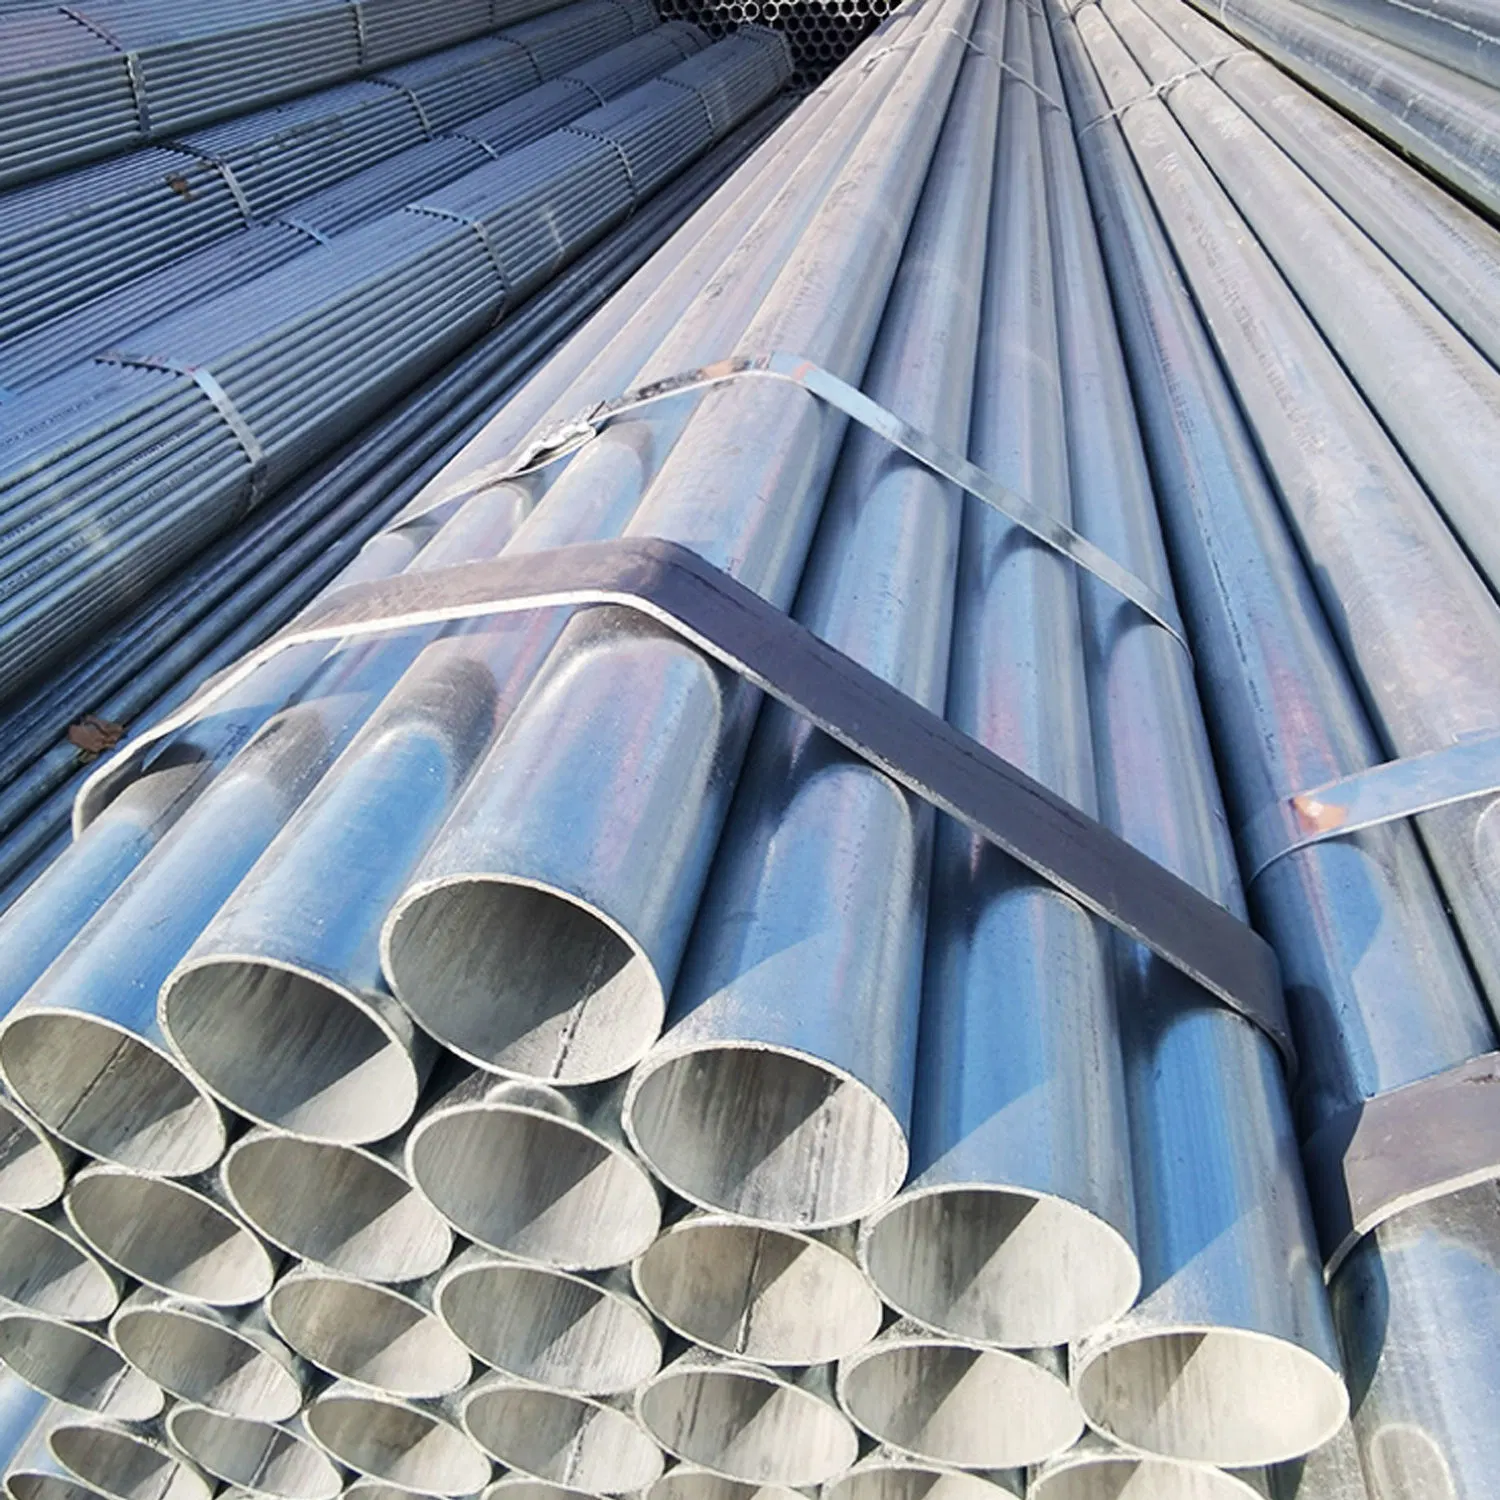 Factory Price Q195 Q215 Q235 Q345 Hot Rolled/Cold Rolled/ERW/Cold Drawn/Dipped/Welded/Seamless/Color Painted/Galvanized Steel Tube/Pipe Used for Gas/Oil/Water